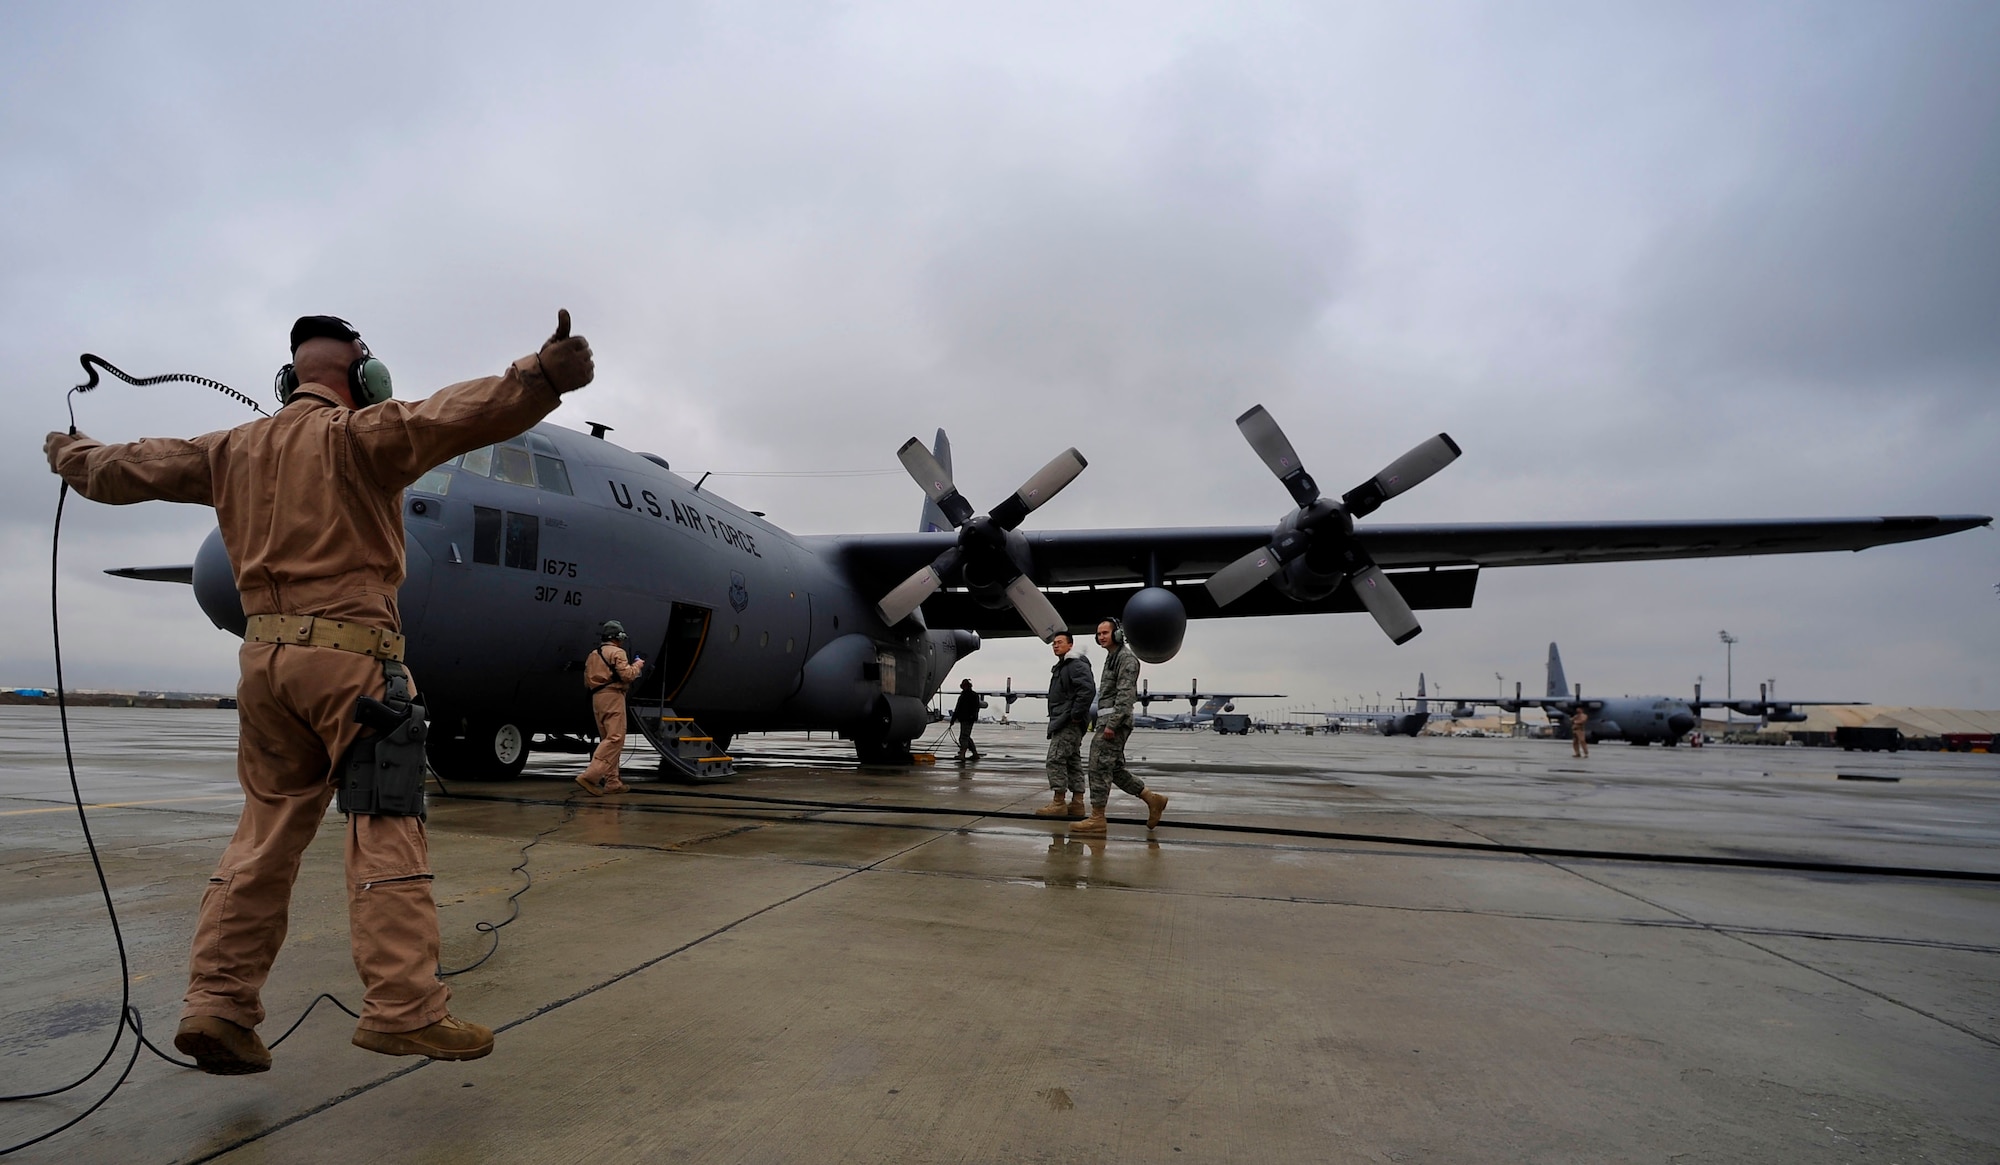 U.S. Air Force Tech. Sgt. Andrew Briggs, loadmaster, 774th Expeditionary Airlift Squadron, deployed to Bagram Airfield, Afghanistan, gives a signal to release the chalks on a C-130H Hercules before the crew flies a mission to airdrop four low-cost low-altitude re-supply bundles, Feb. 6, 2010. This mission marked the first time an Air Force C-130 crew airdropped LCLA bundles in a combat zone.   (U.S. Air Force photo/Staff Sgt. Angelita Lawrence/released)
